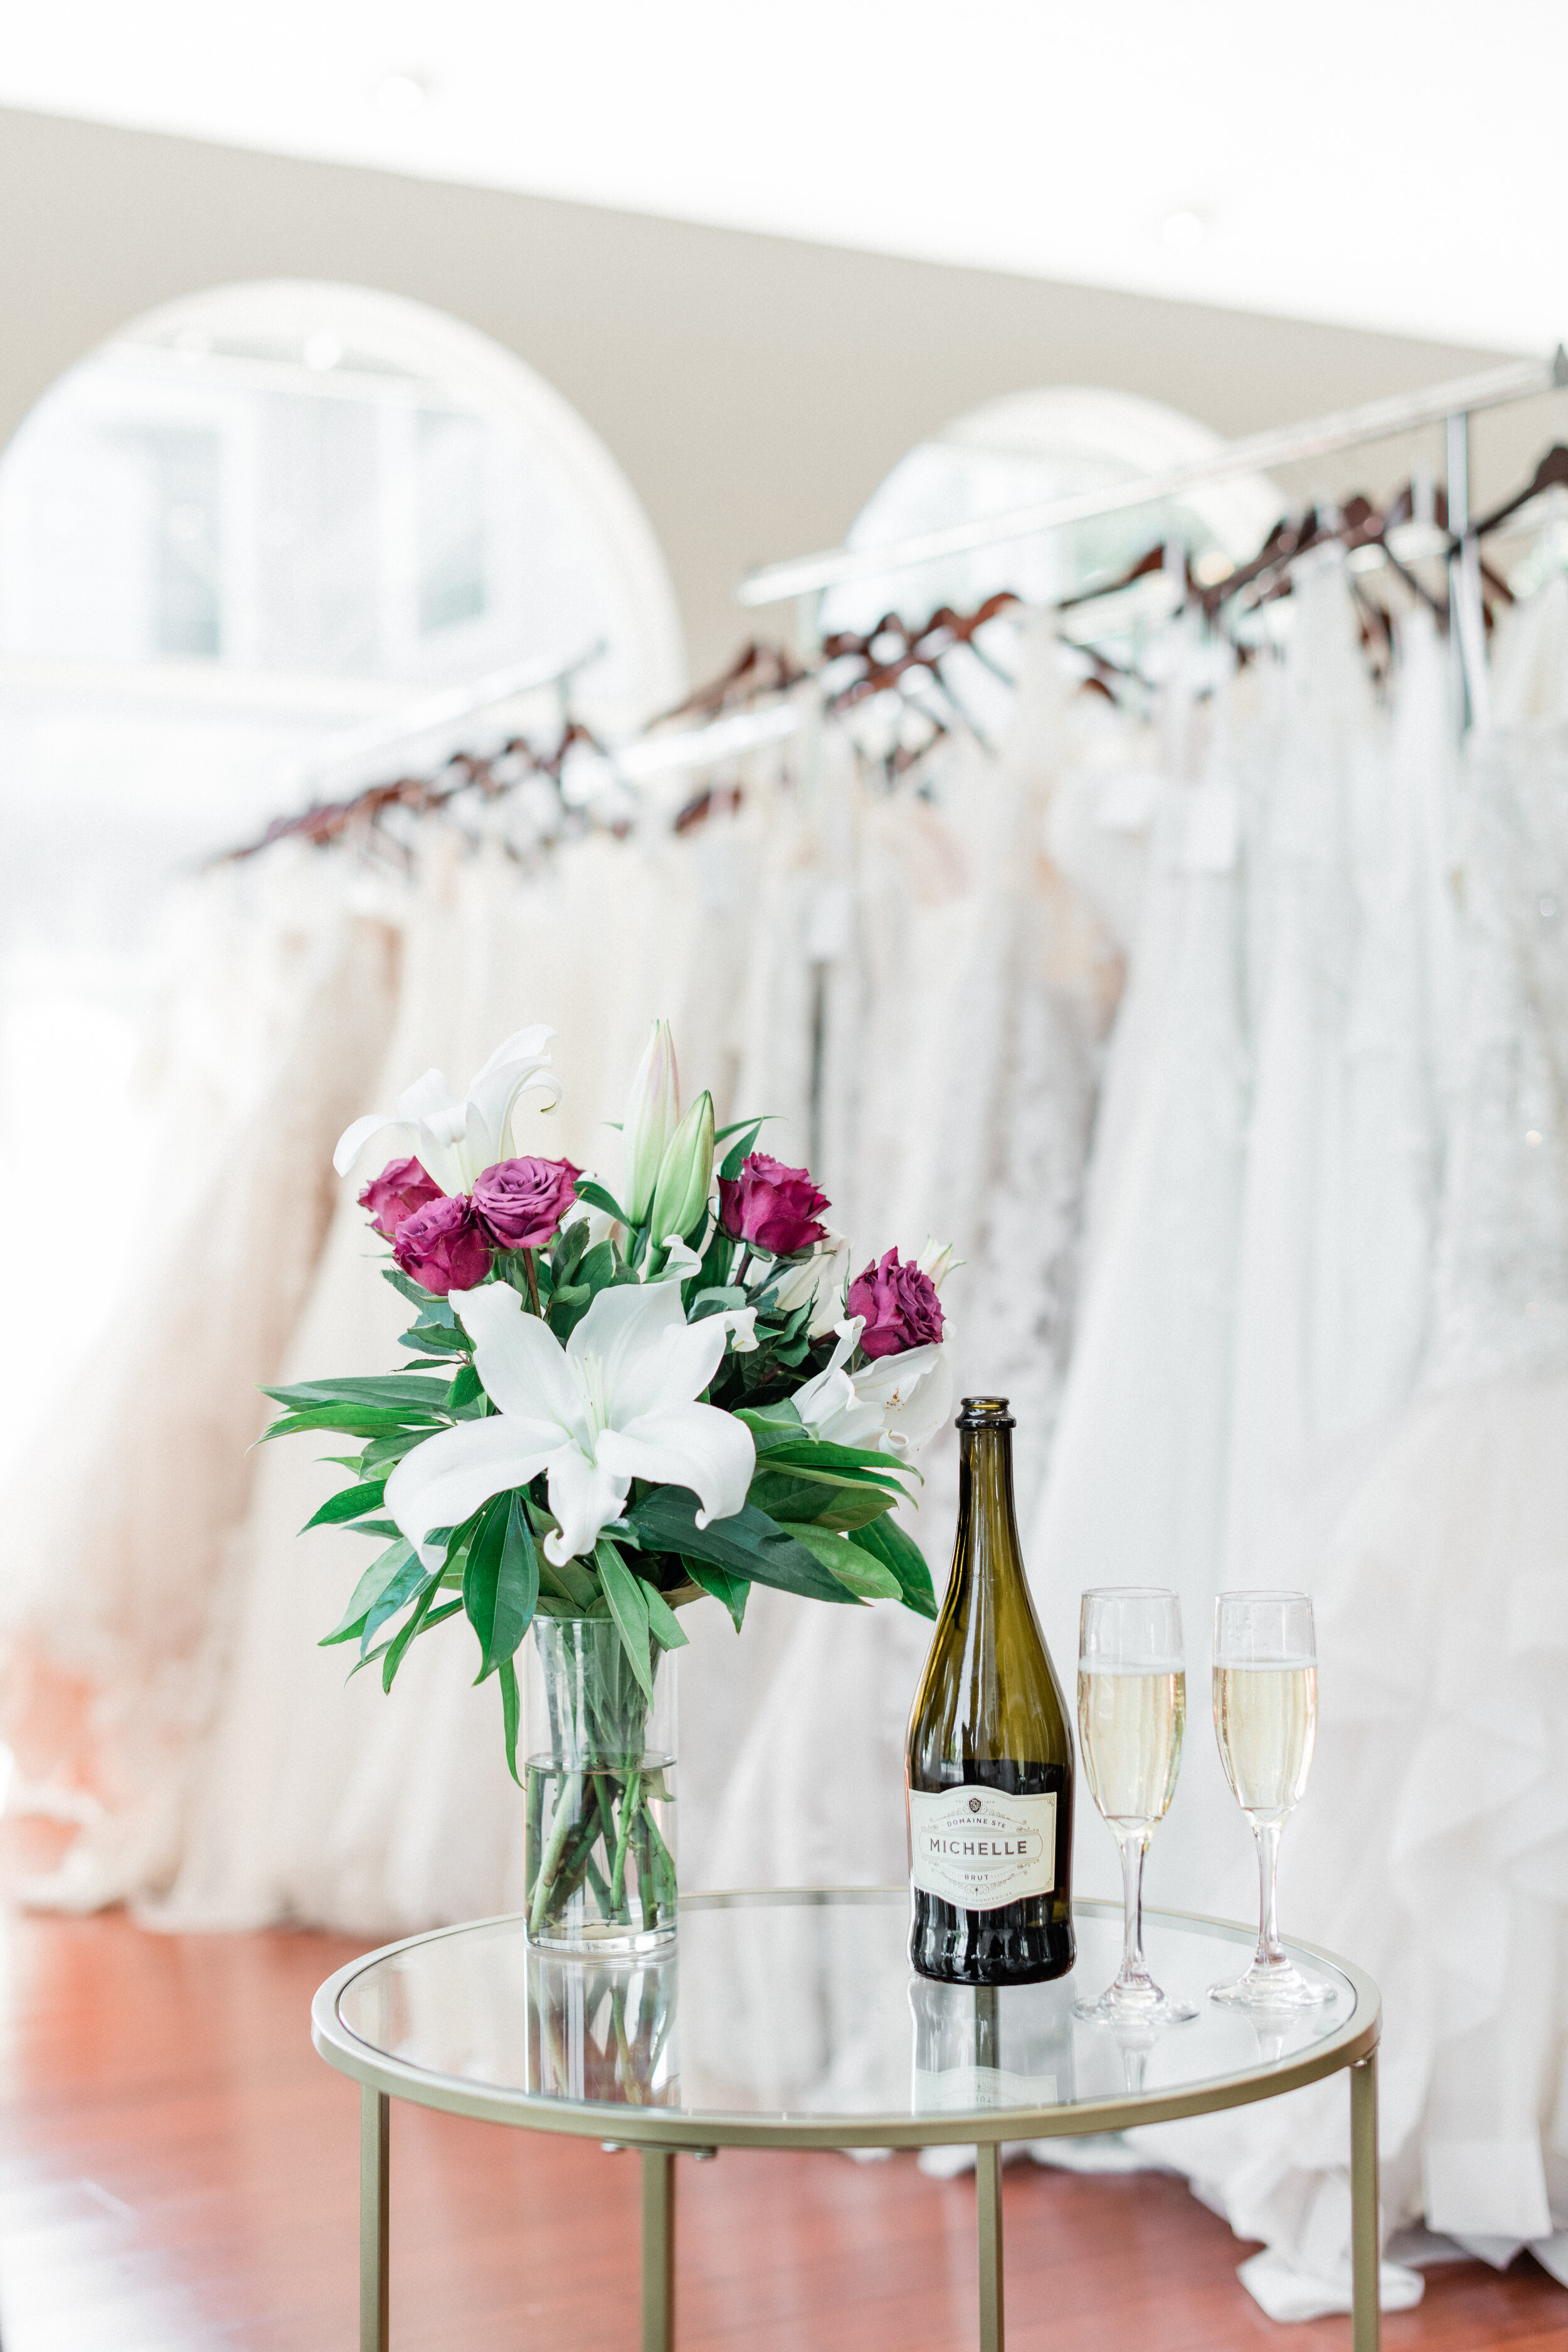 The Champagne Experience - Enjoy an after-hours exclusive bridal appointment with bubbly, small bites, and all the dresses you can get your hands on!